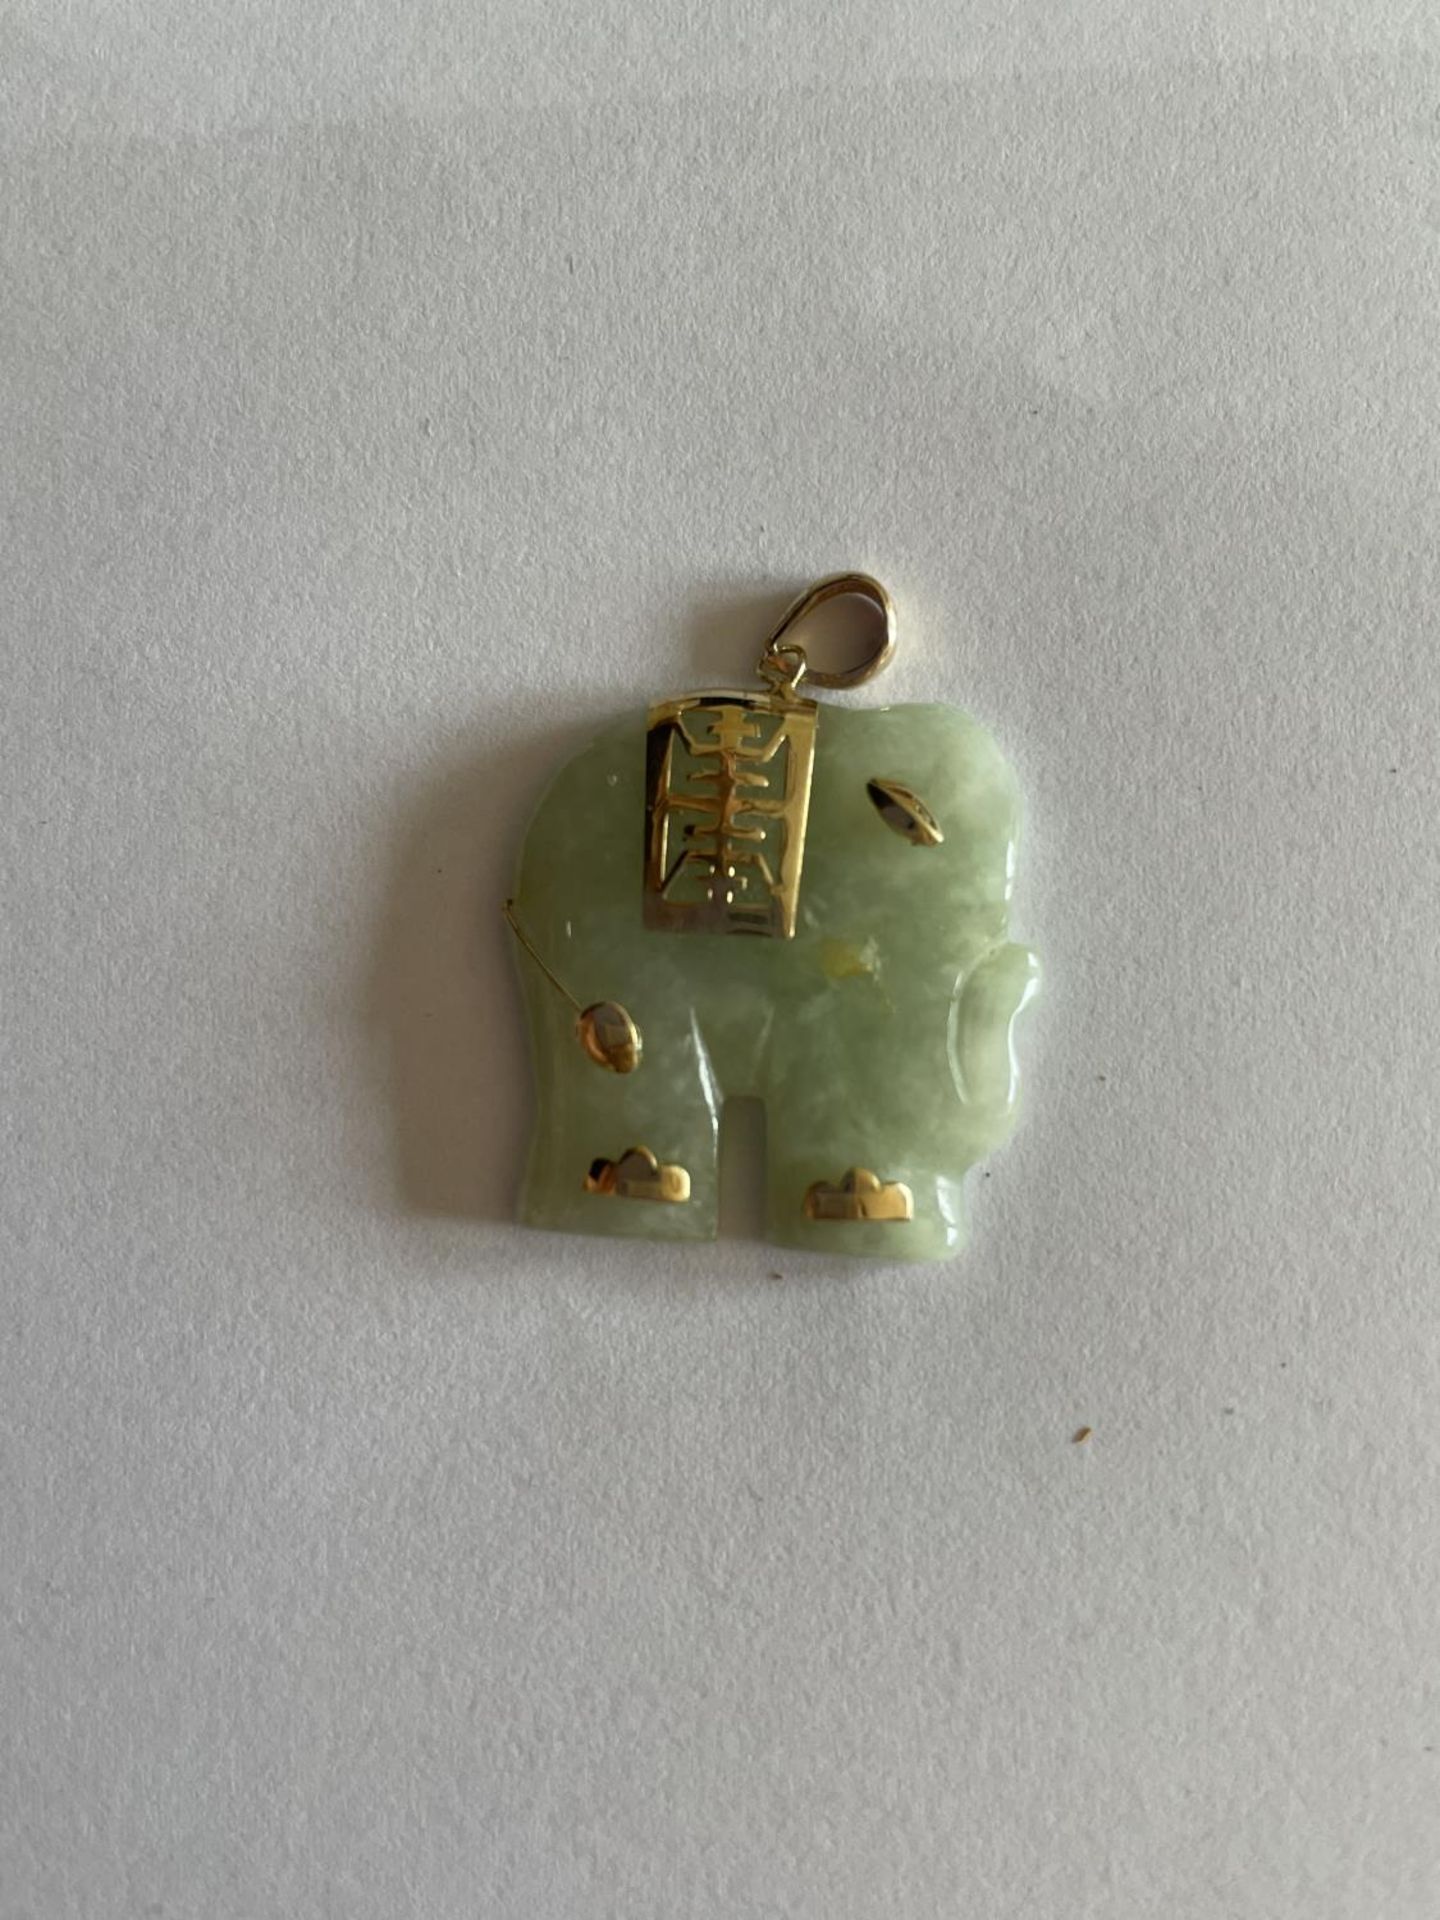 A 14 CARAT GOLD AND JADE PENDANT IN THE FORM OF AN ELEPHANT IN A PRESENTATION BOX